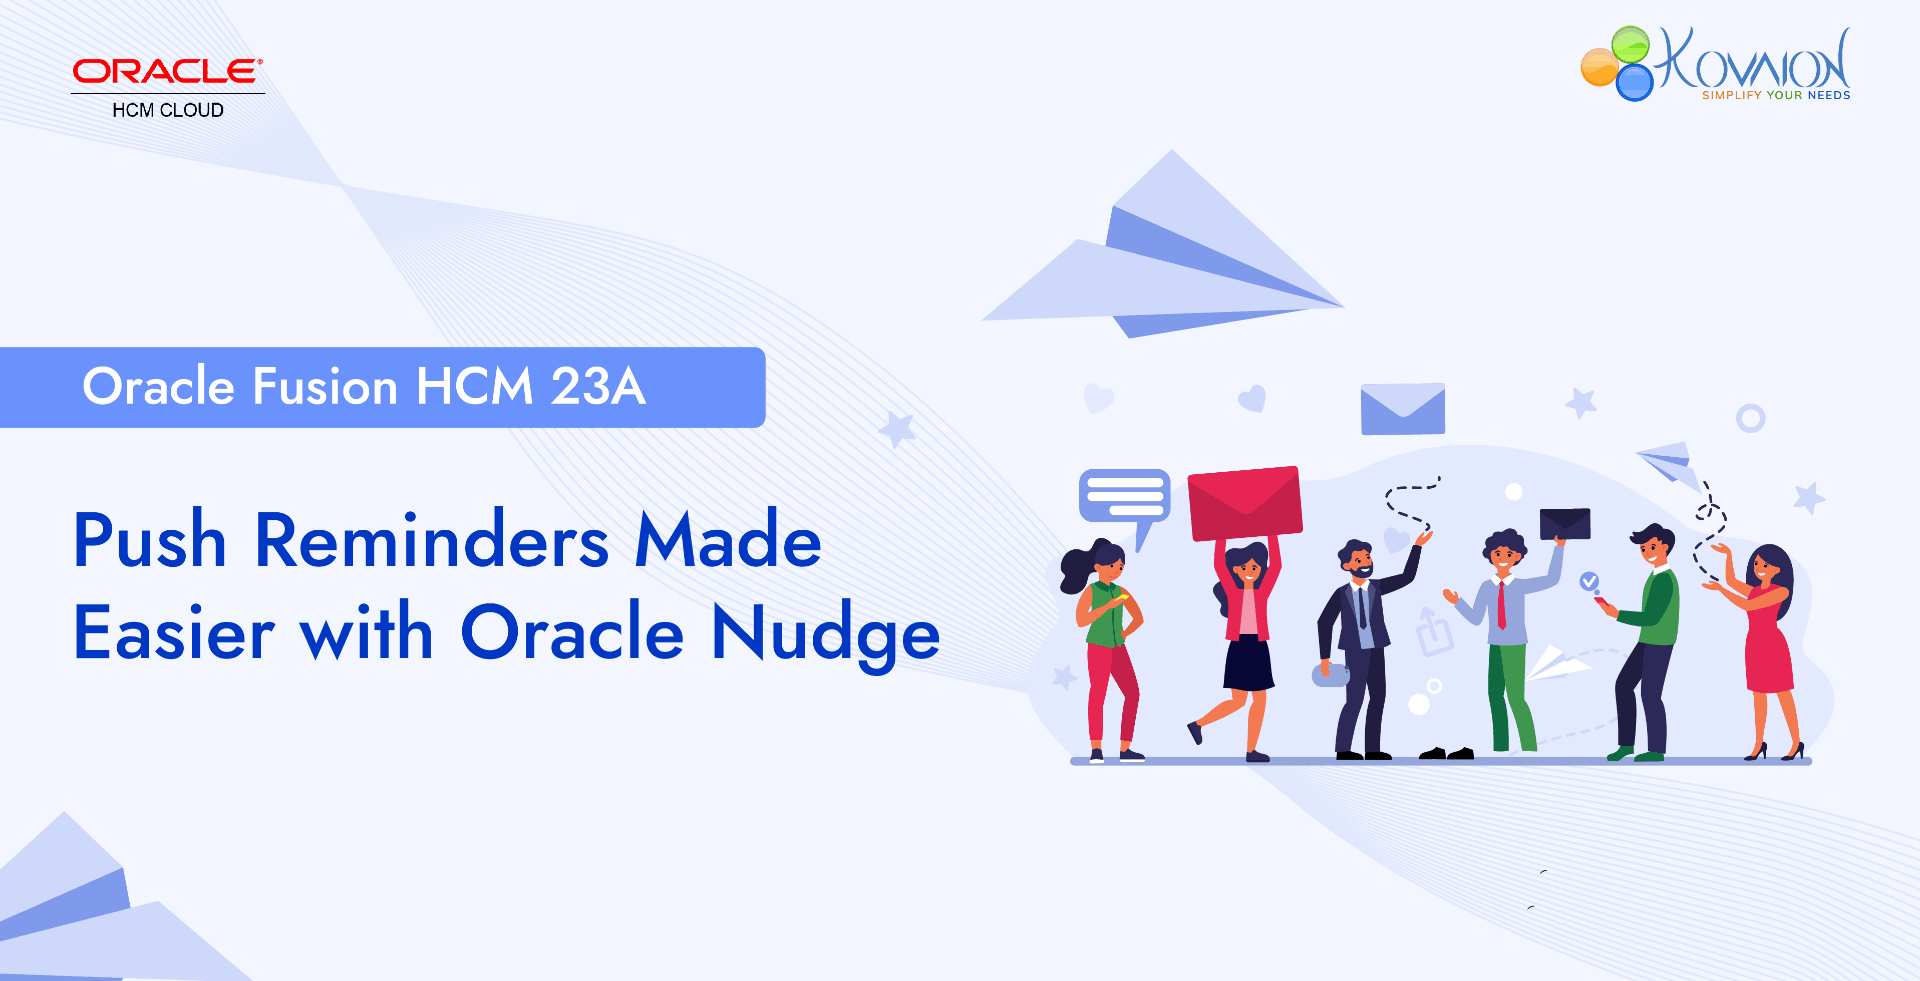 Oracle-Fusion-HCM-23A-Push-Reminders-Made-Easier-with-Oracle-Nudge